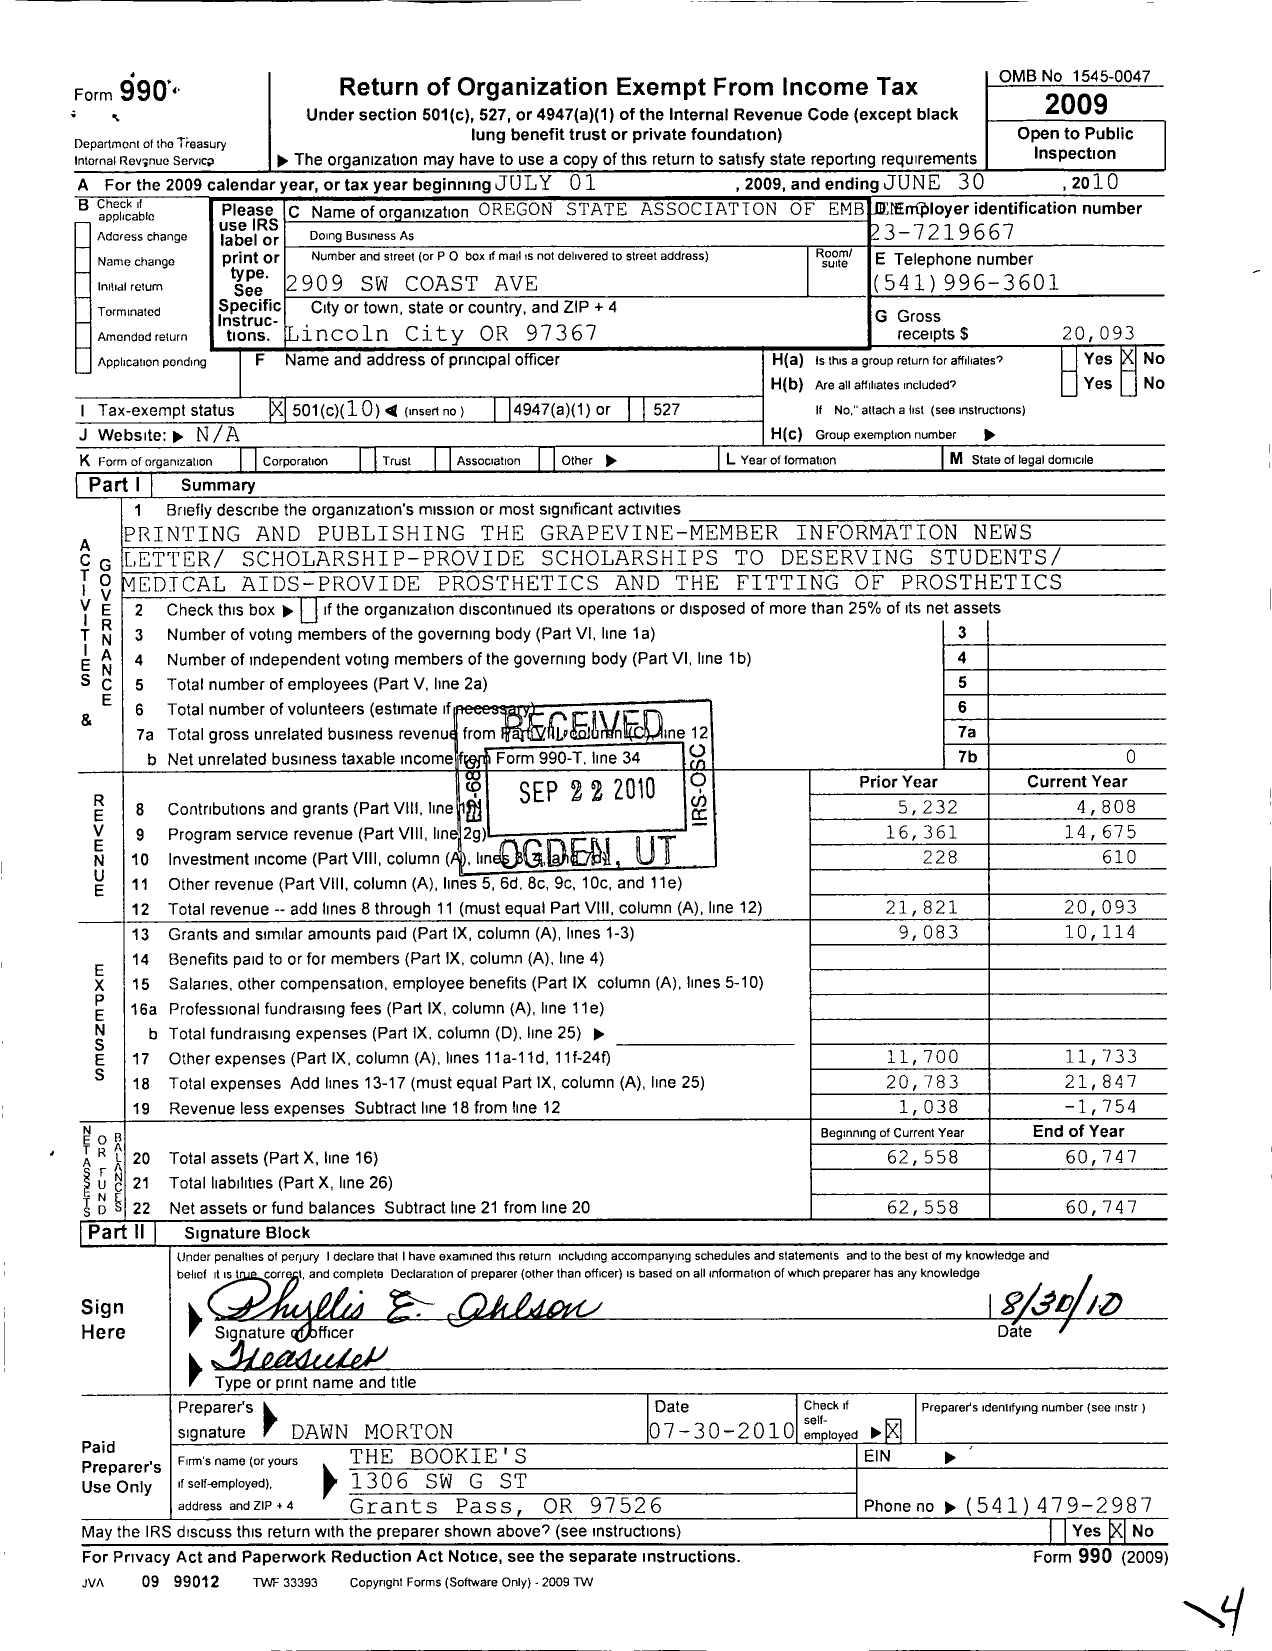 Image of first page of 2009 Form 990O for Supreme Emblem Club of the United States of America / Oregon State Assoc of Emblem Clubs